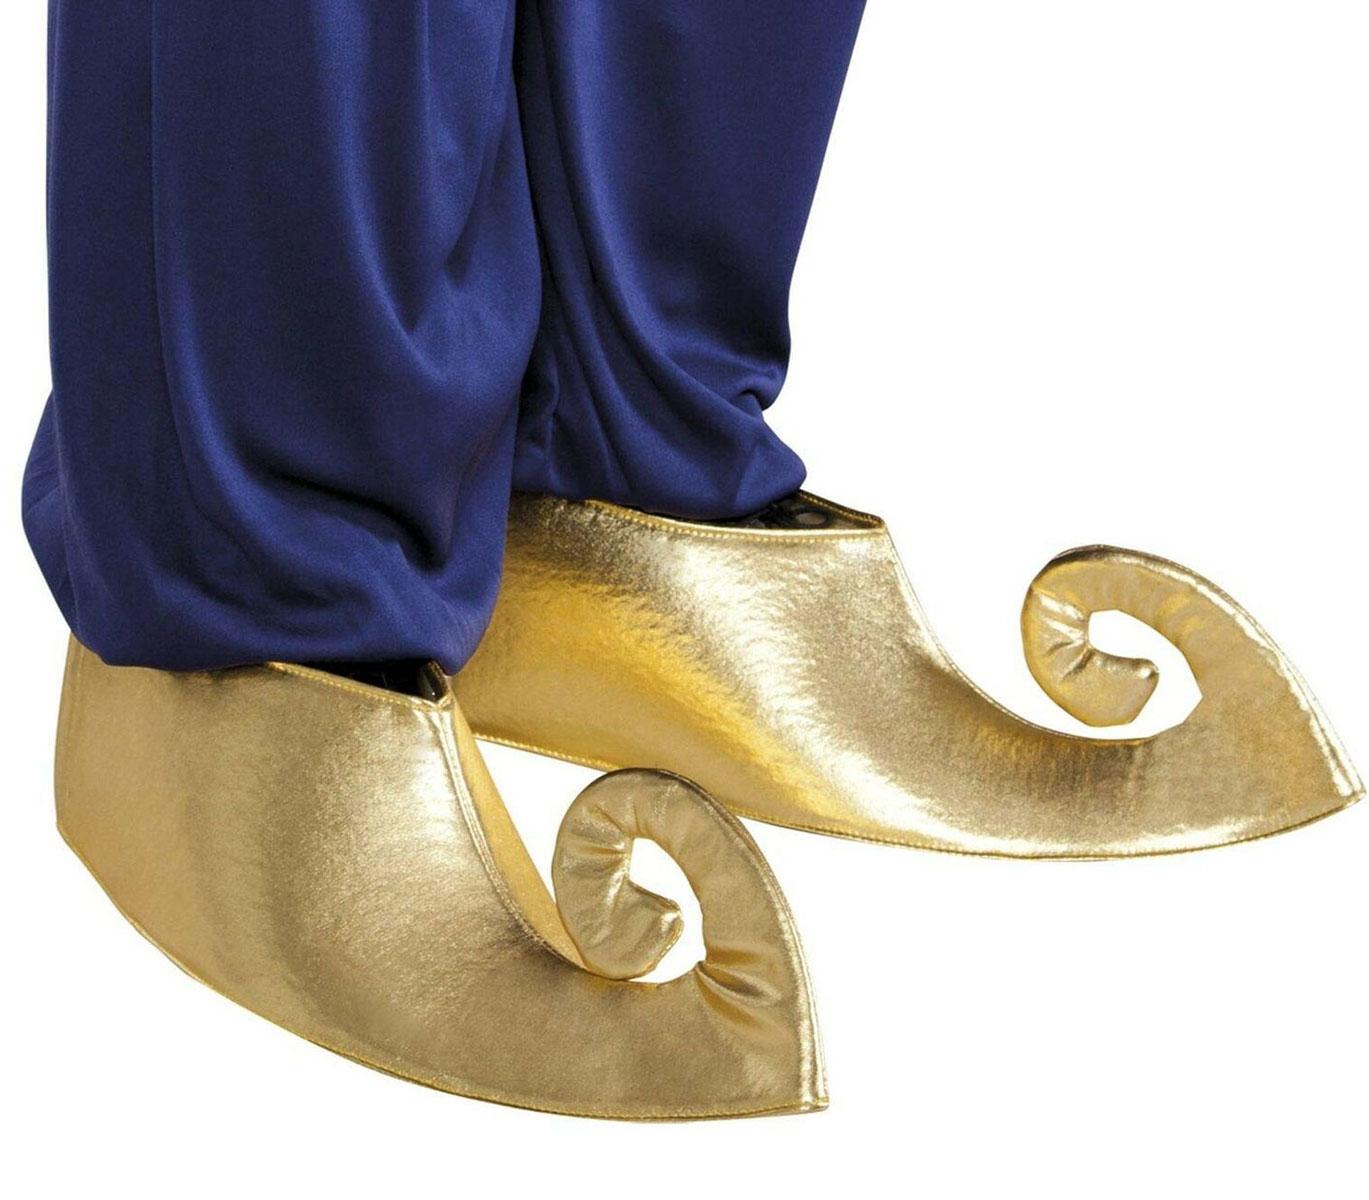 Arabian Shoe Covers in Gold by Boland 81990 available here at Karnival Costumes online party shop